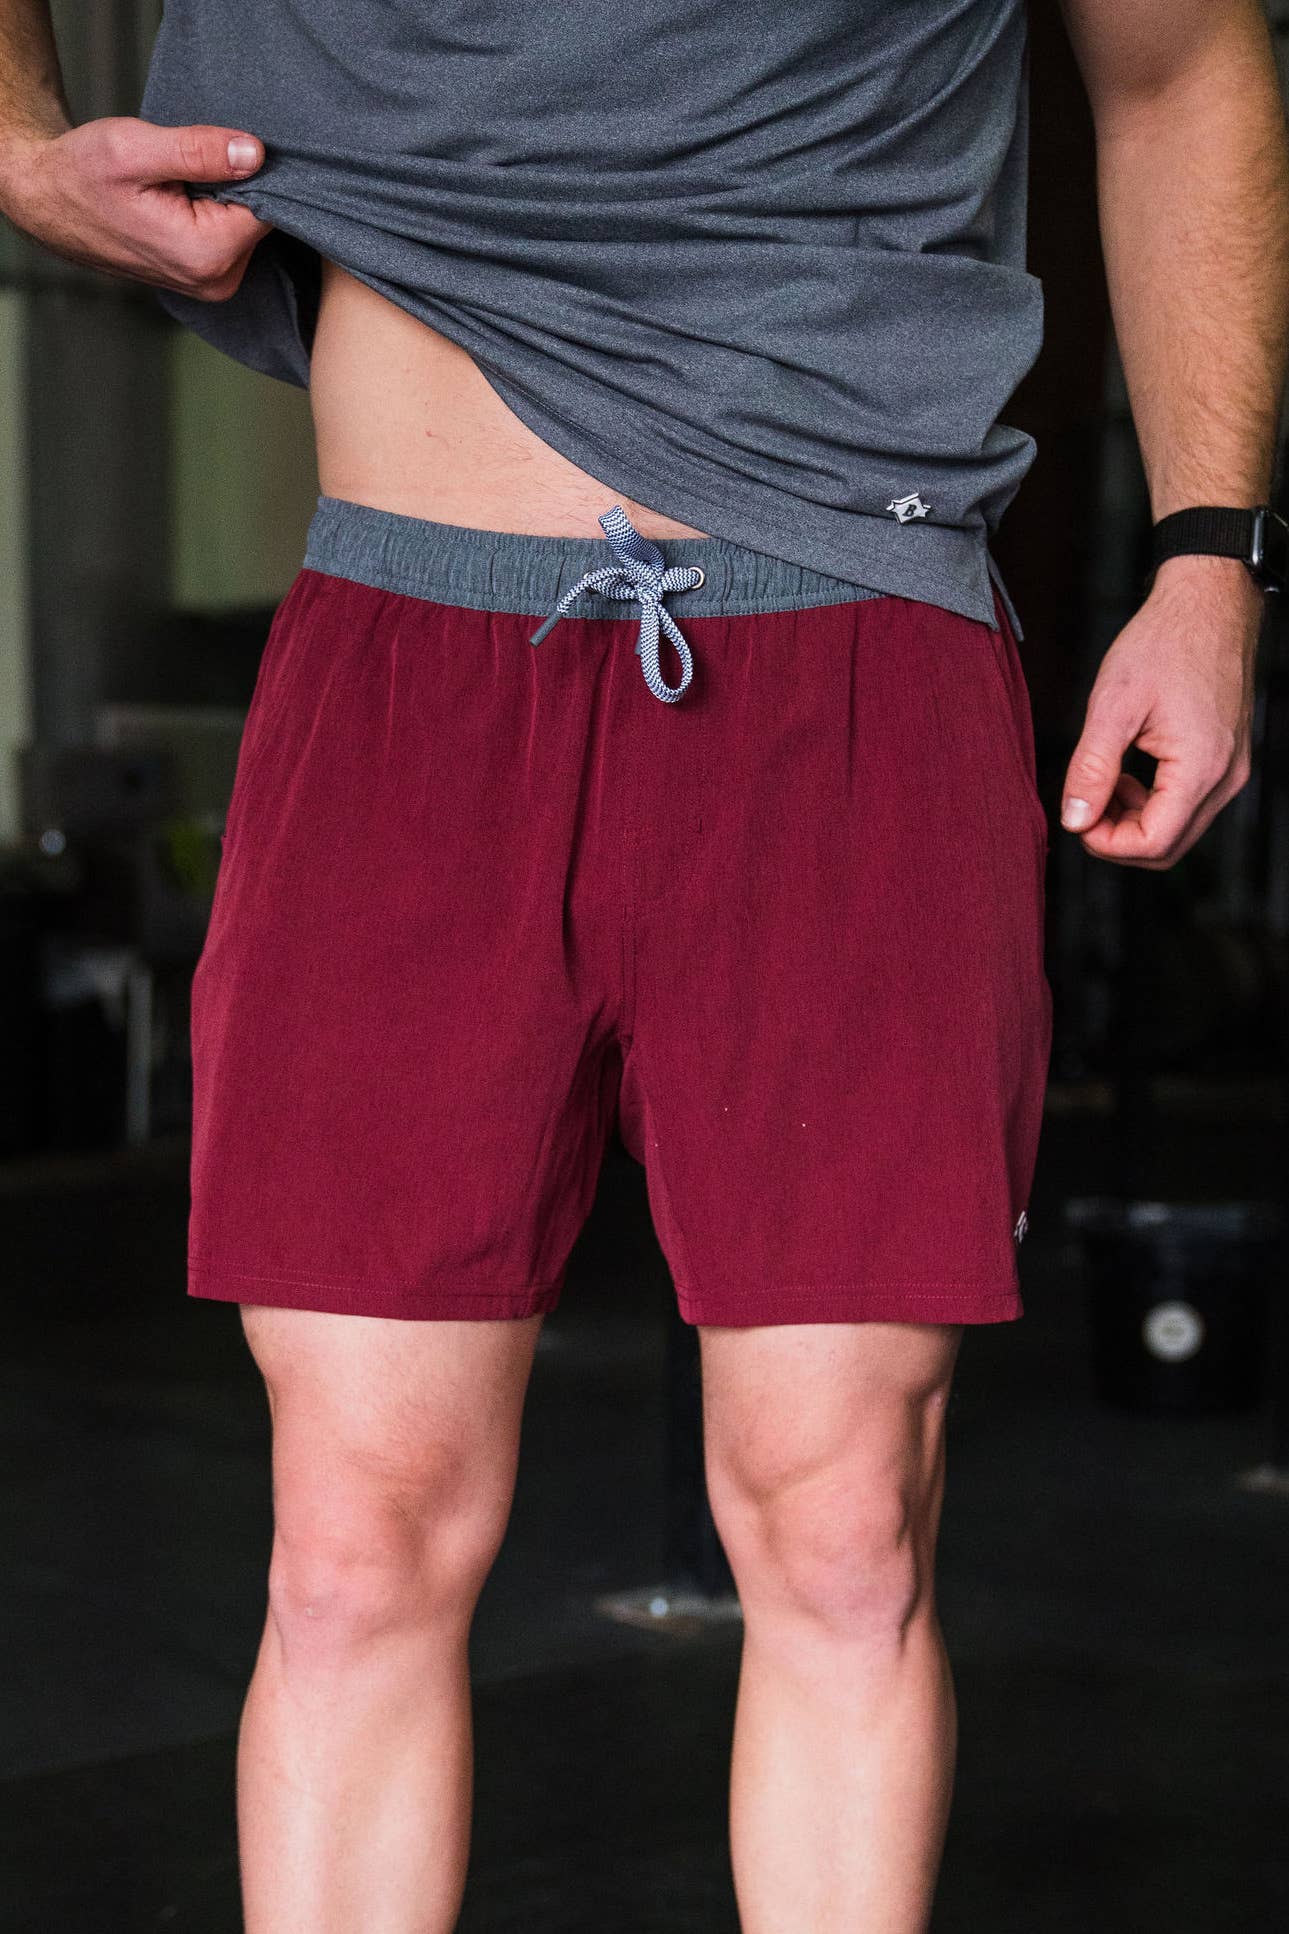 Athletic Short - Maroon - White Camo Liner